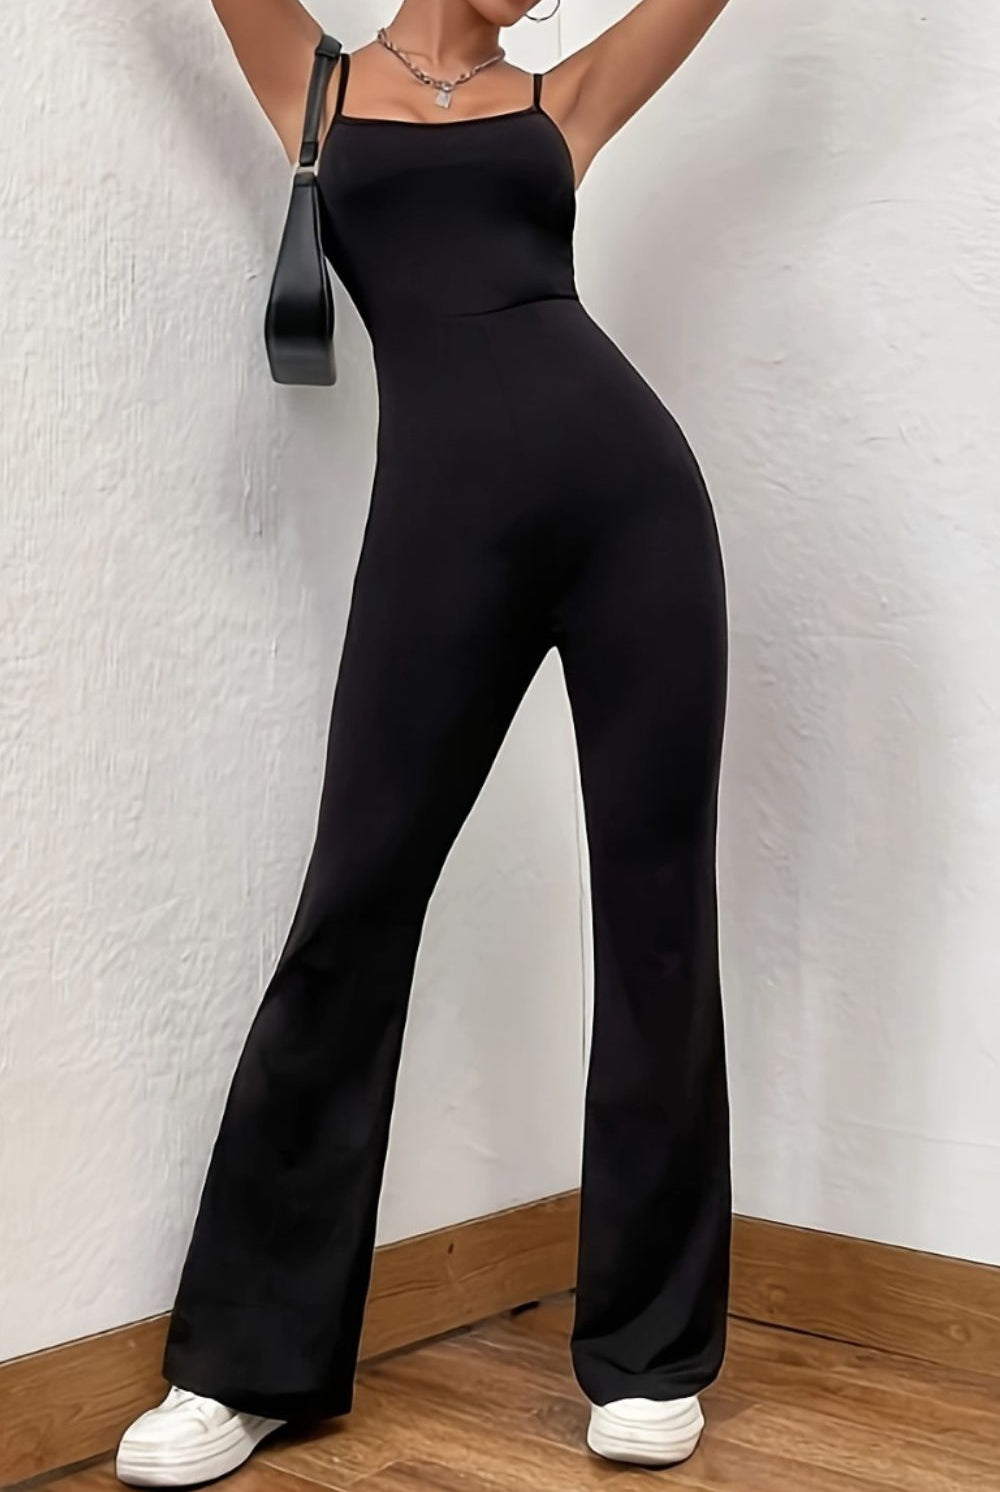 Chic and elegant woman in a sophisticated black spaghetti strap jumpsuit with a fitted bodice and flared legs, carrying a sleek bag, epitomizing modern style with a timeless appeal.